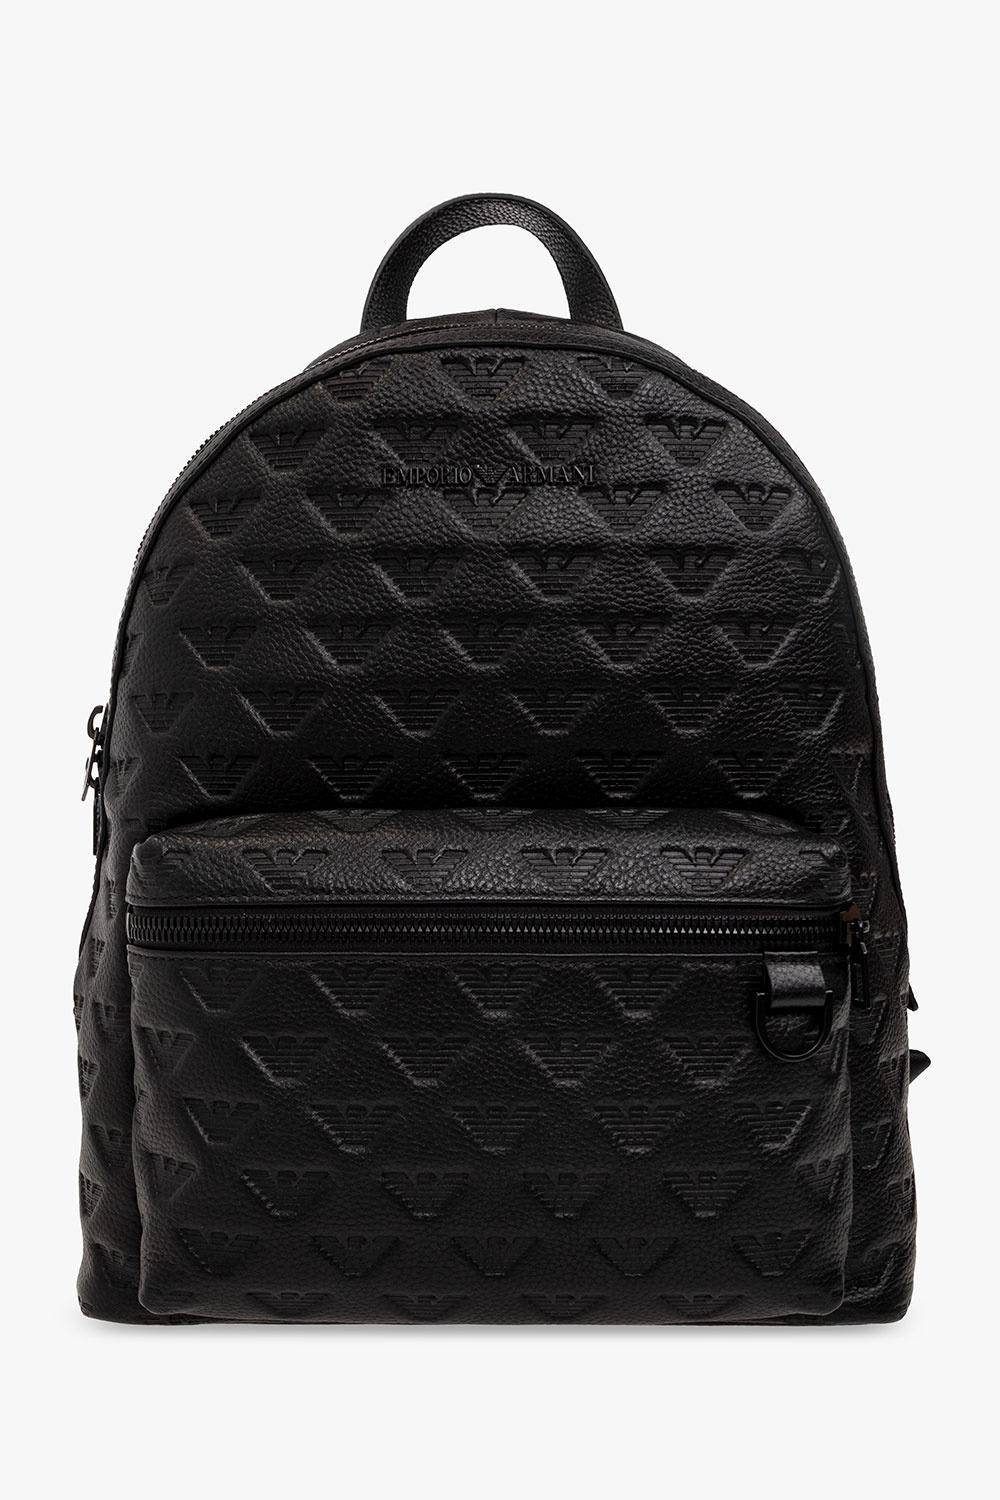 Emporio Armani Embossed Leather Backpack In Negro